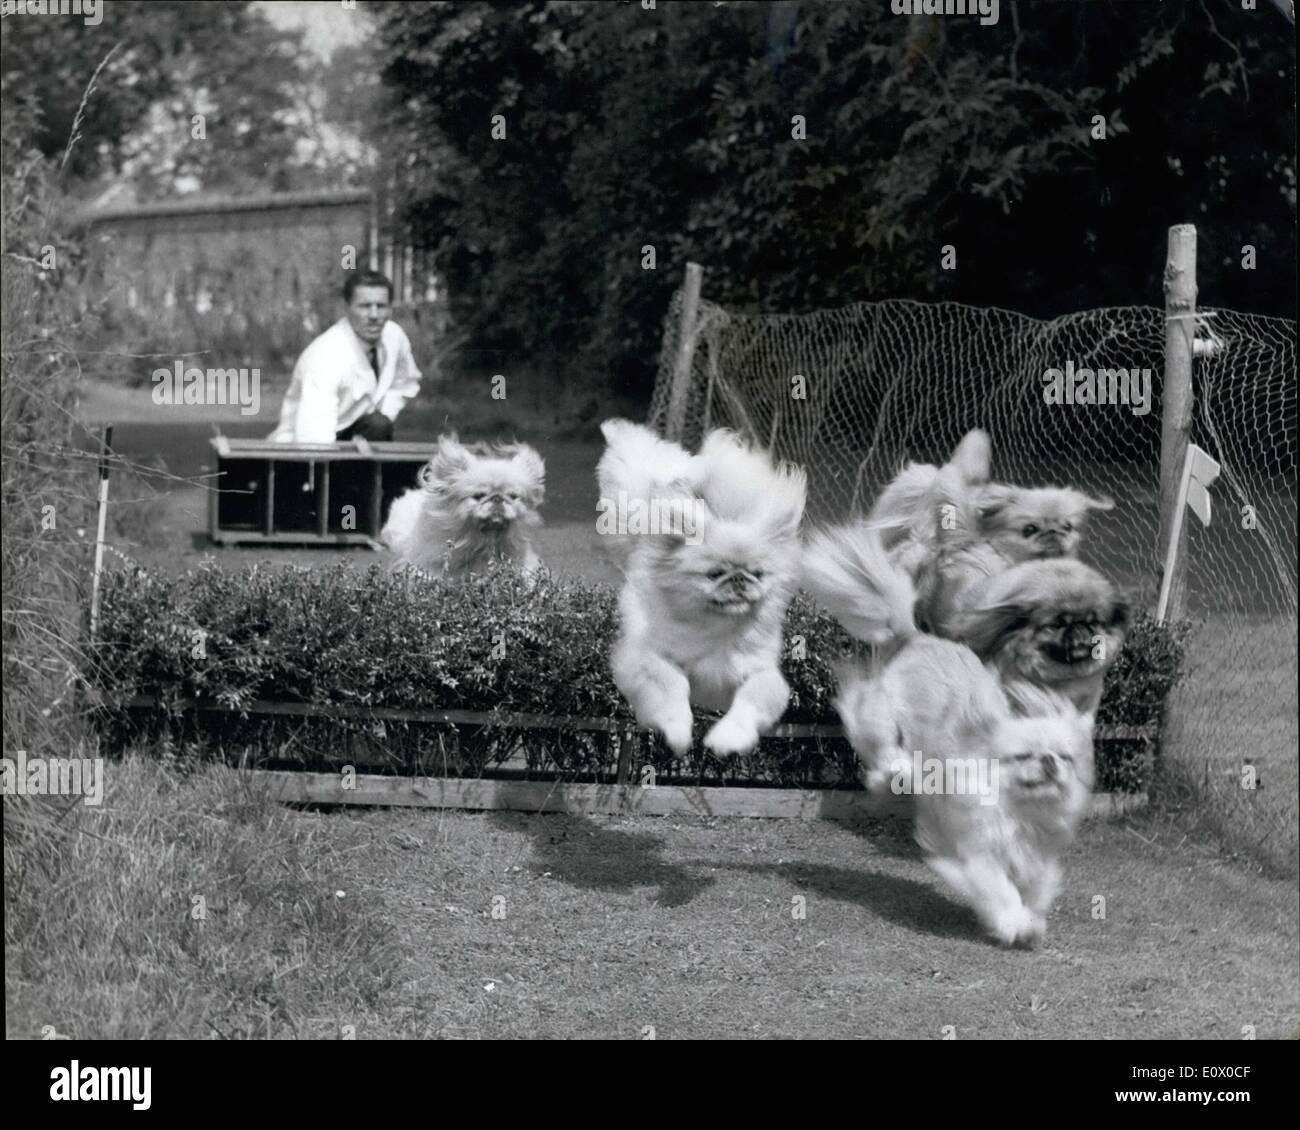 Jul. 07, 1964 - Racing Time for pekes - at Good wood.. It was Racing time for Pekes today - at Lording ton park, Chichester - the home of COL and Mrs. Geoffrey Phiprs Hornby.. They raced over a minister course complete with brushwood fences and a water jump - and the 'race' was watched by a number of Well known Personalities - guests at the House Party. Keystone Photo Shows:- The Pekes - named Lindy, Dinah; Blondie: Lucy: Jenny and Chloe - seen as they take one of the Jumps - at Chichester today. Stock Photo